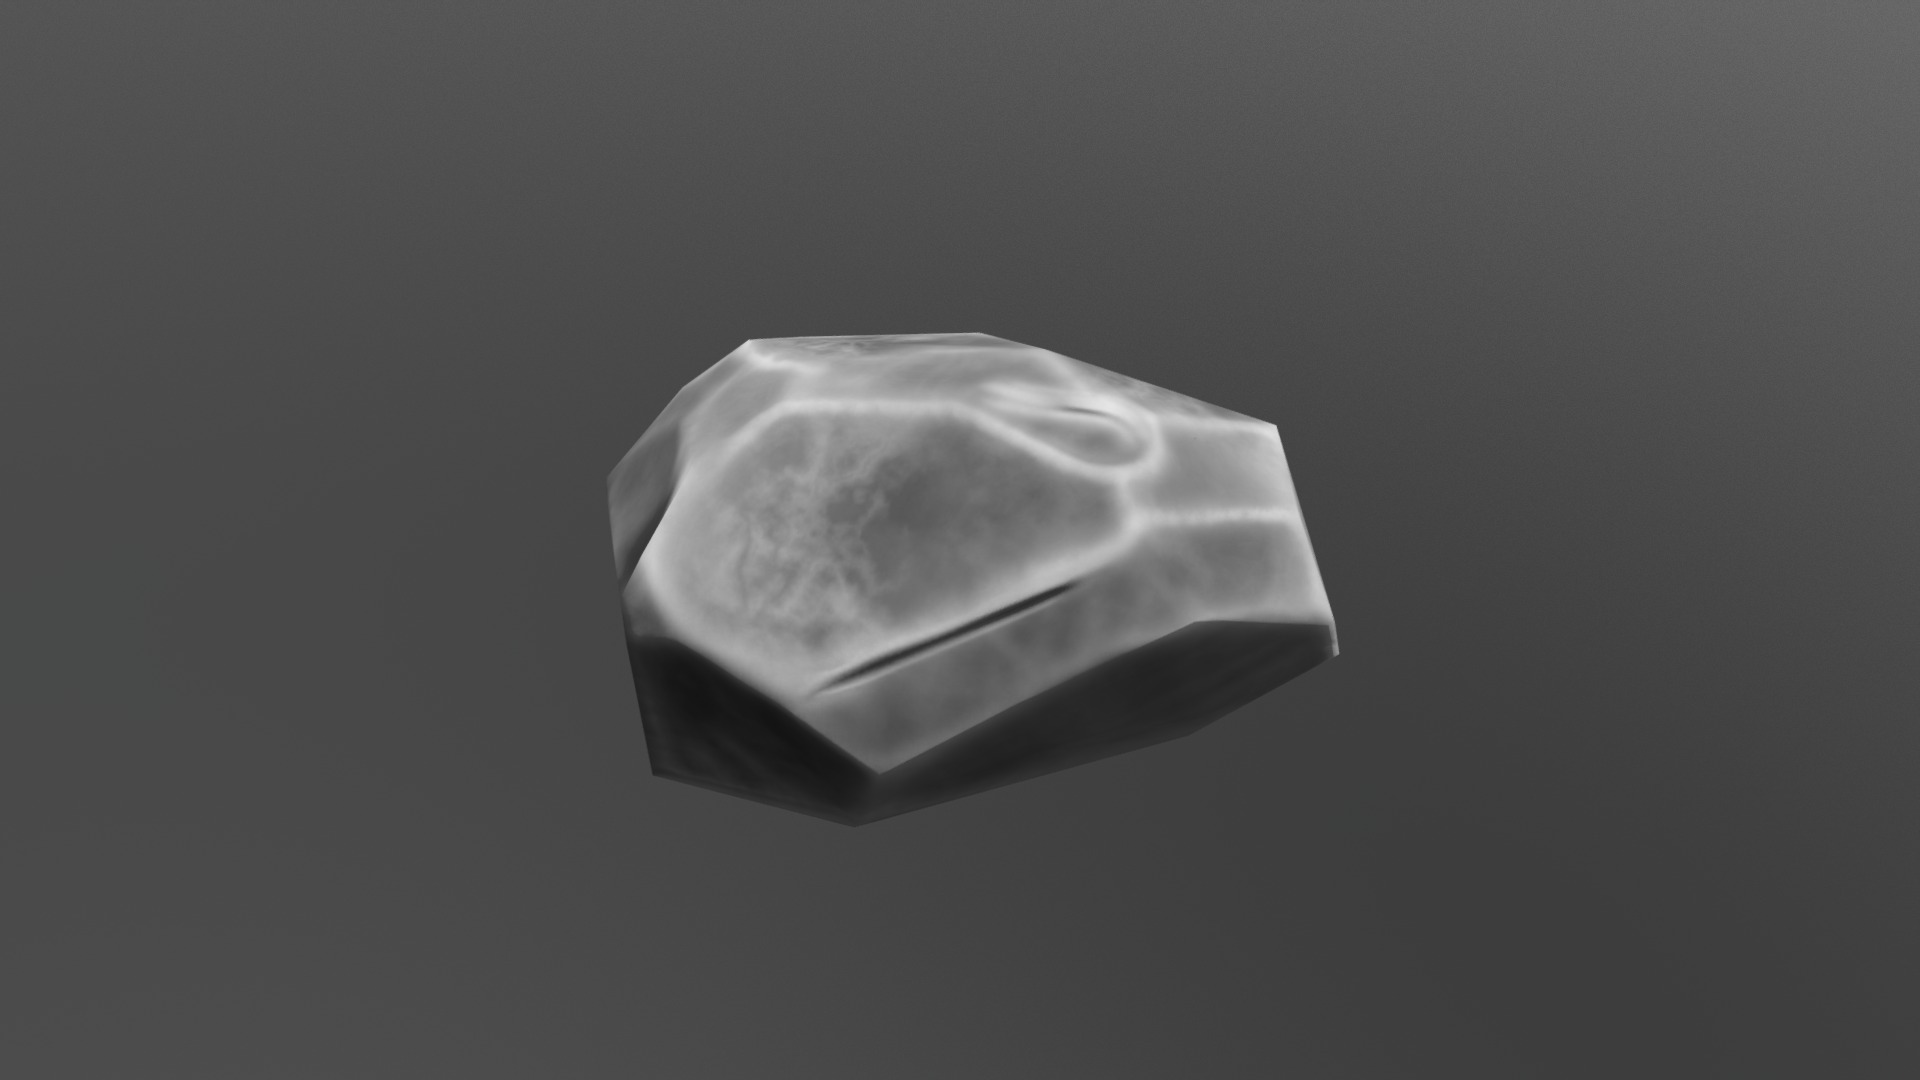 3D model Rock 1 - This is a 3D model of the Rock 1. The 3D model is about a white square object.